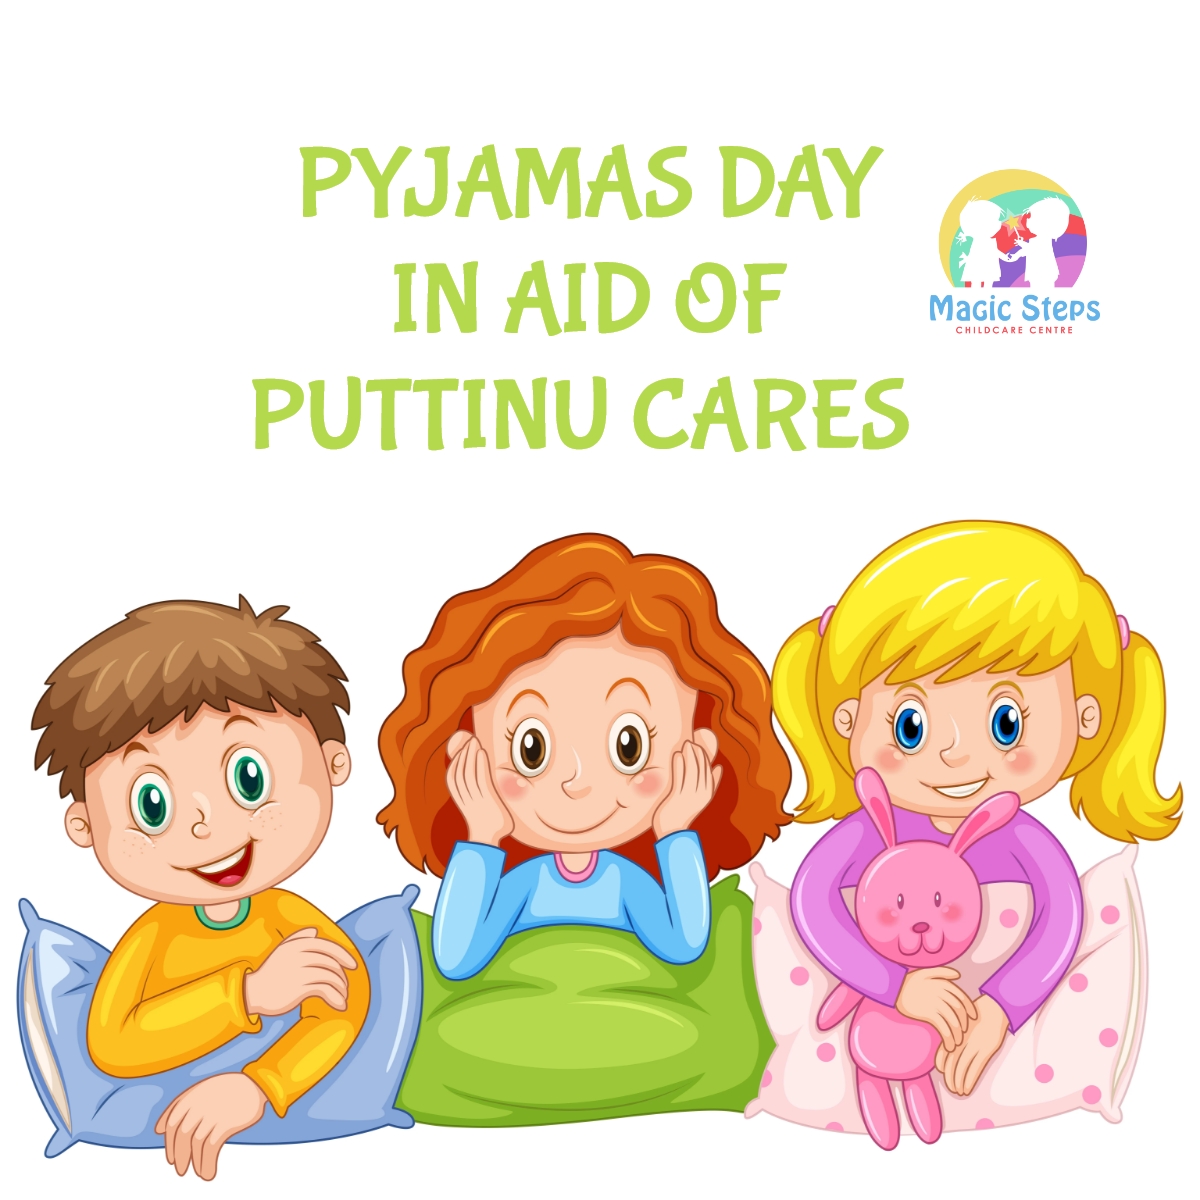 Pyjamas Day In Aid of Puttinu cares- Thursday 27th January